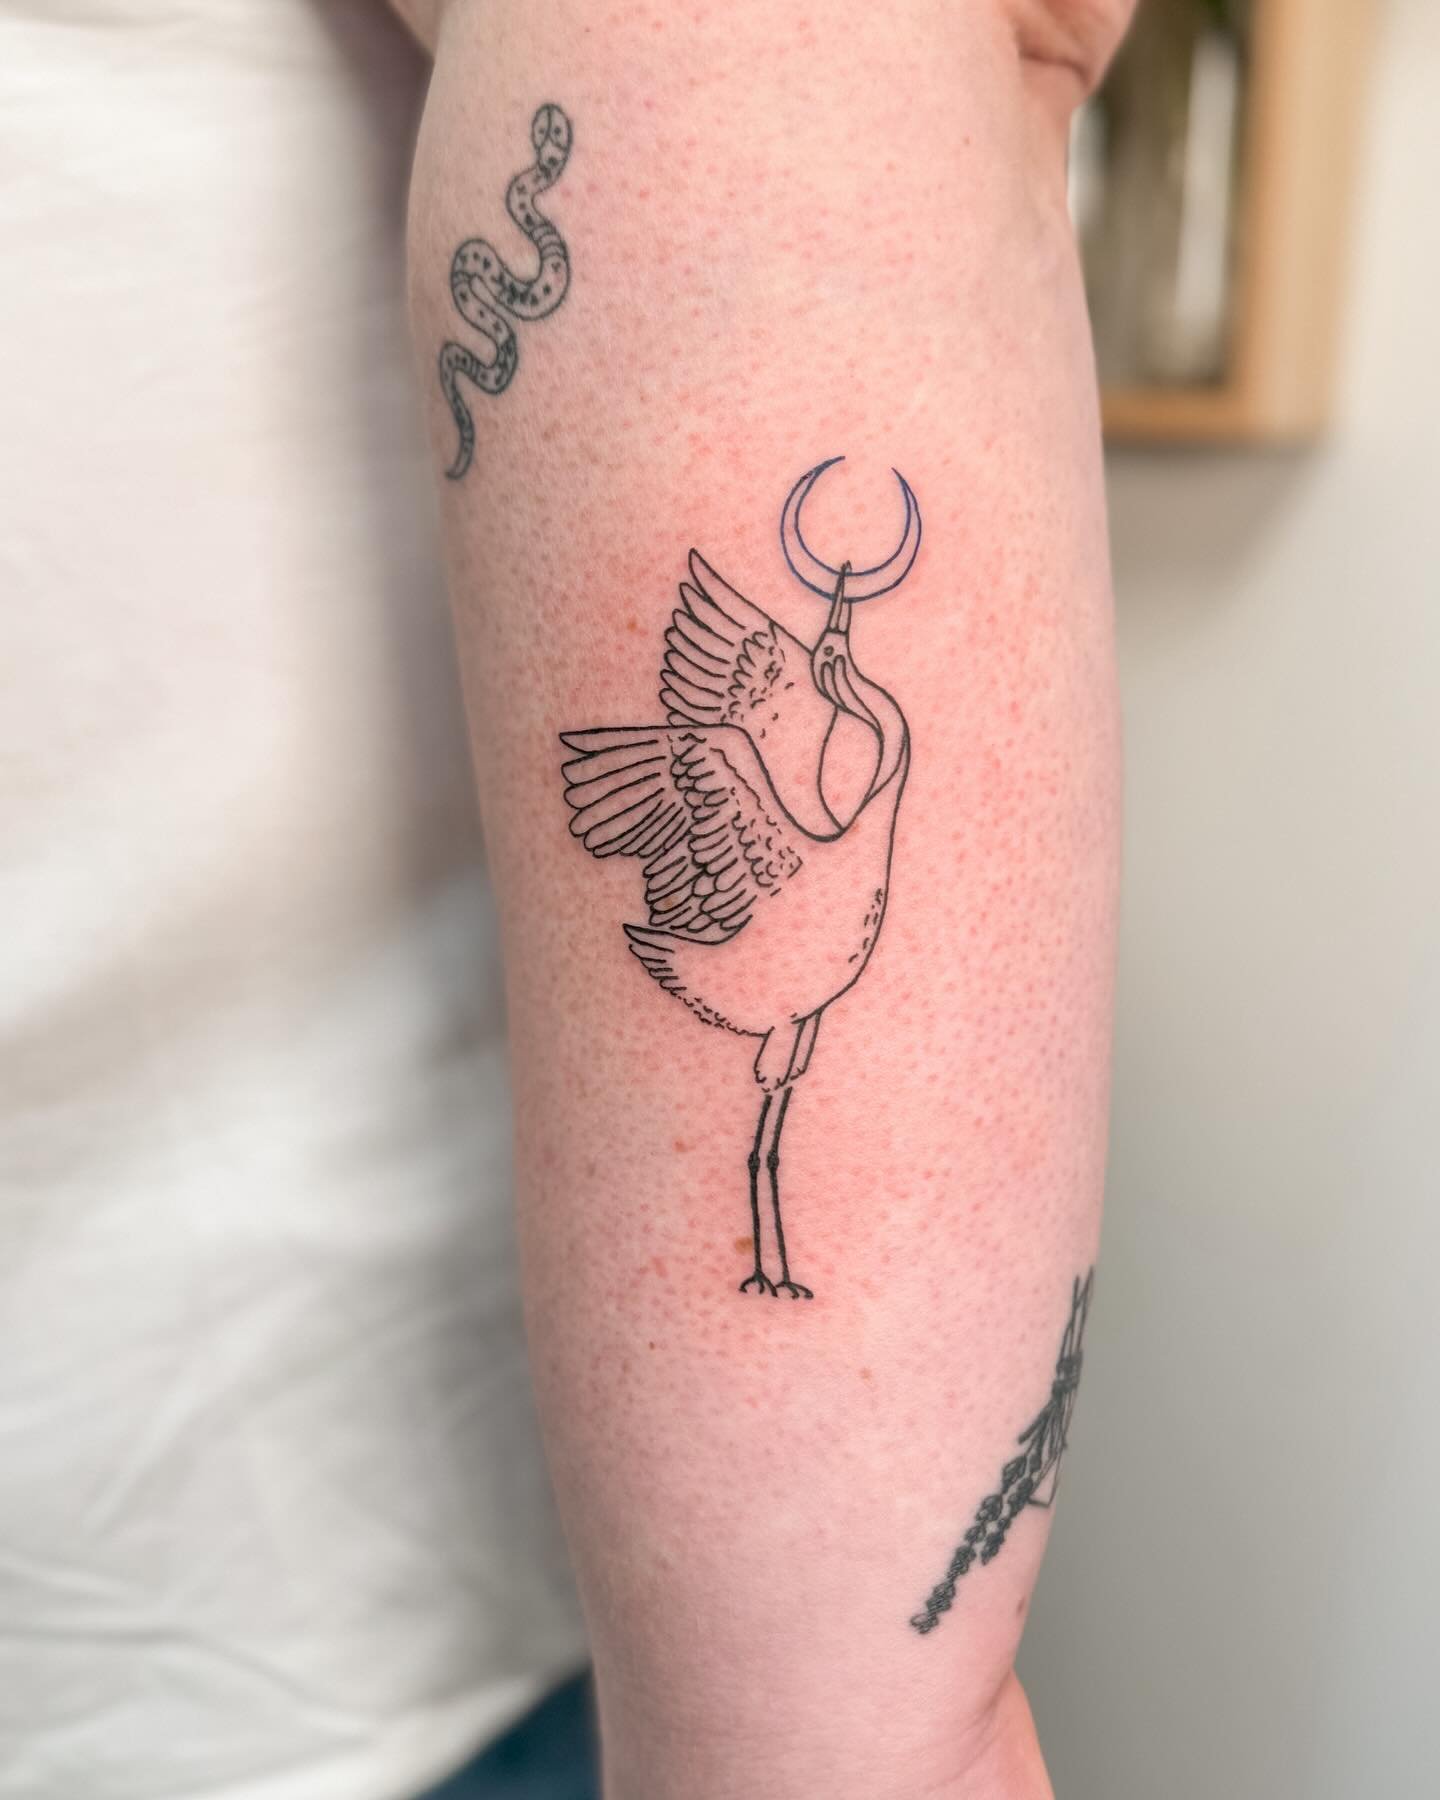 Absolutely obsessed with this heron and crescent moon my client brought me that was designed by the INCREDIBLE @fiz_lorsman 😍 (*not designed by me*)

I love tattooing my own designs (obvi), but getting to tattoo commissioned or permit pieces is also